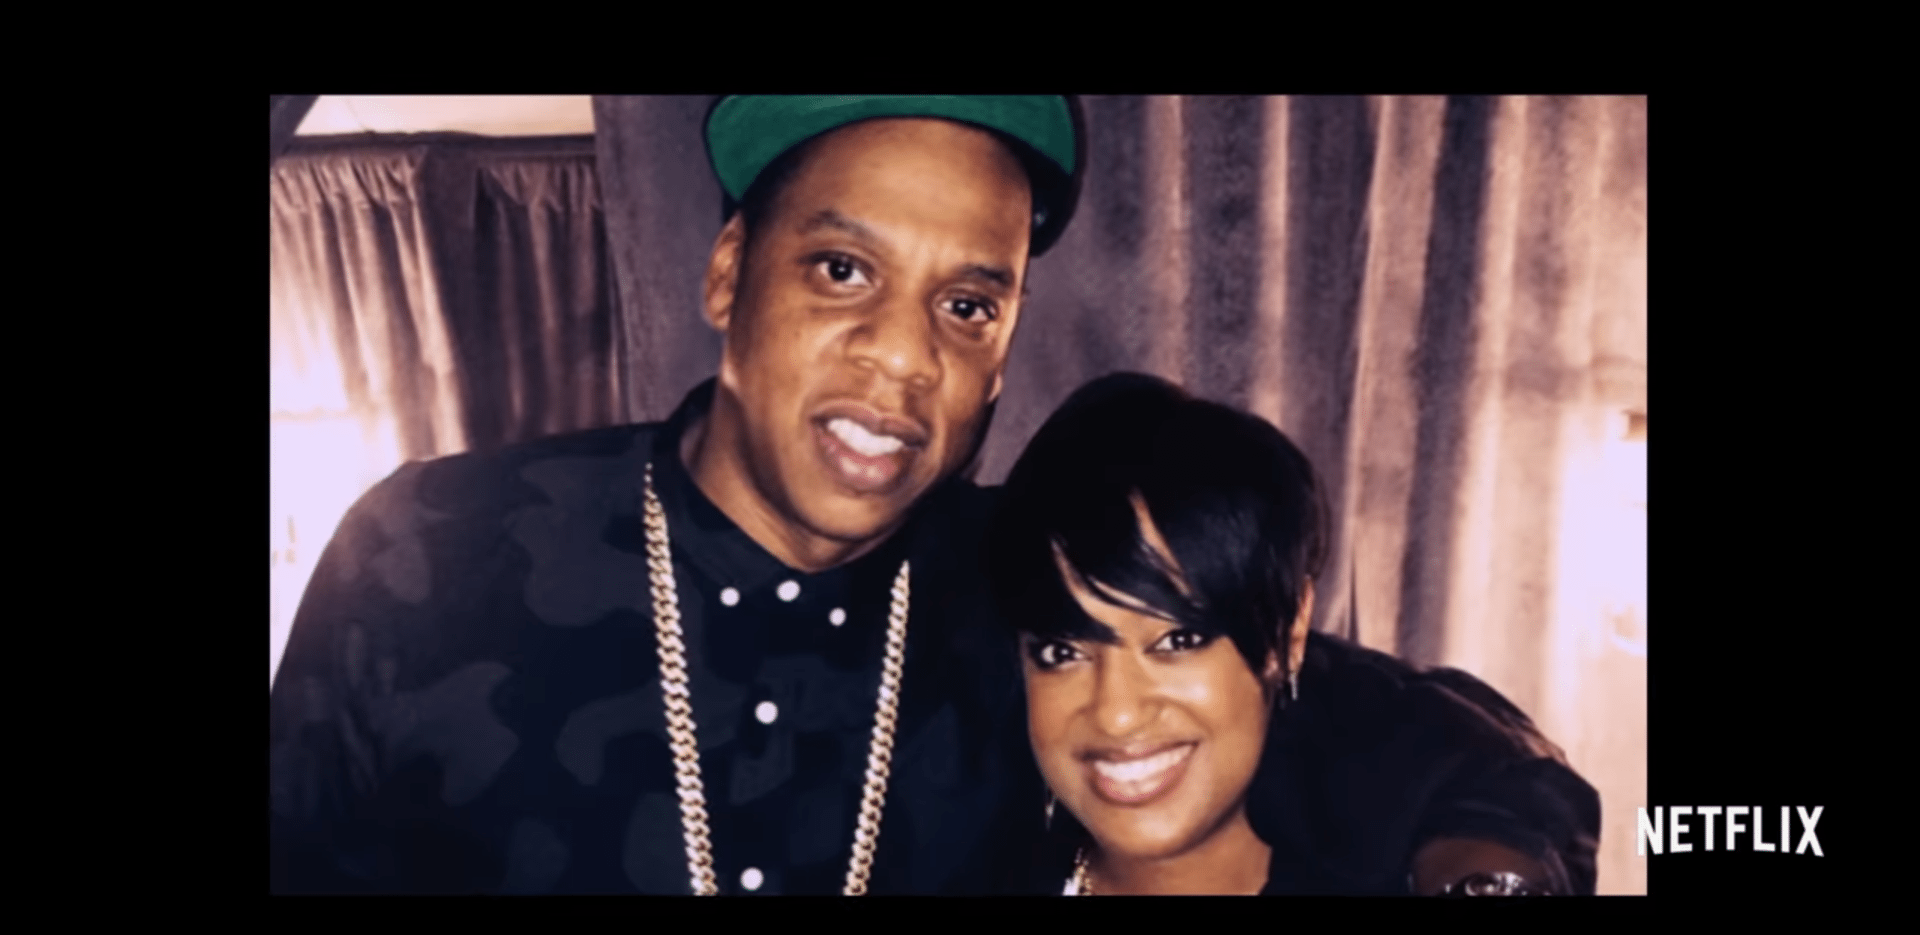 Jay-z and a woman